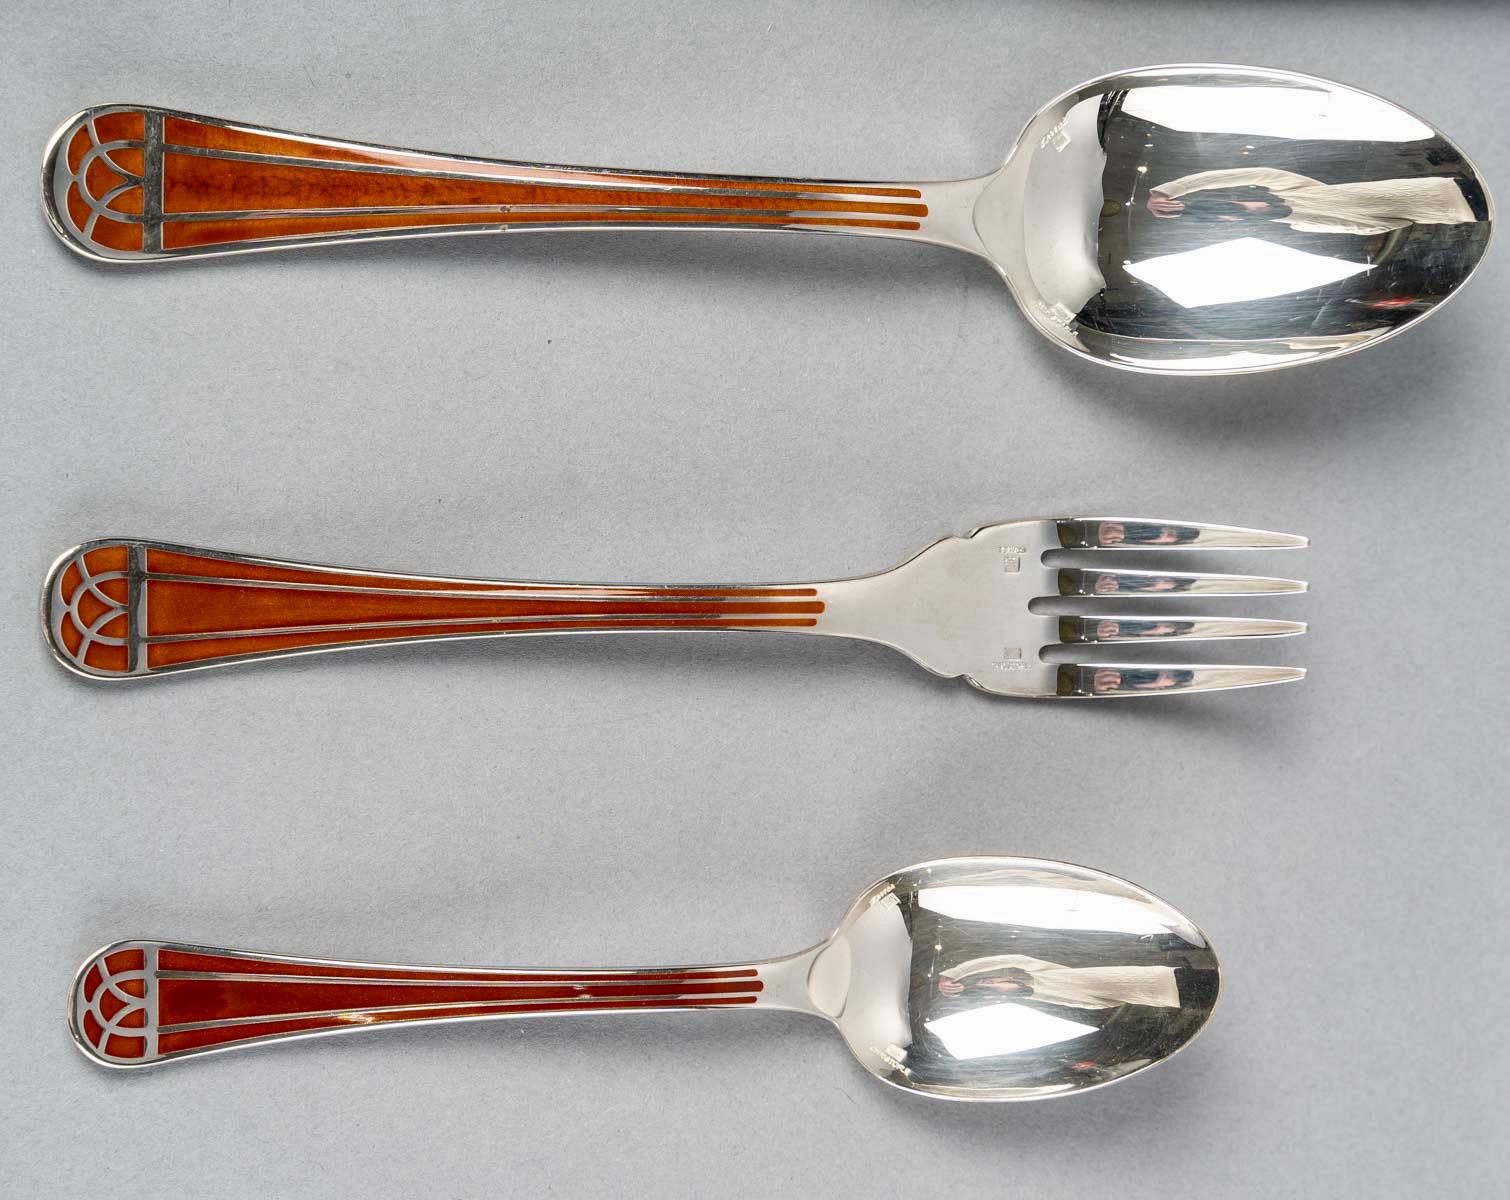 Art Deco Christofle Flatware Cutlery Set Talisman Plated Silver & Sienna Lacquer 31 Pces